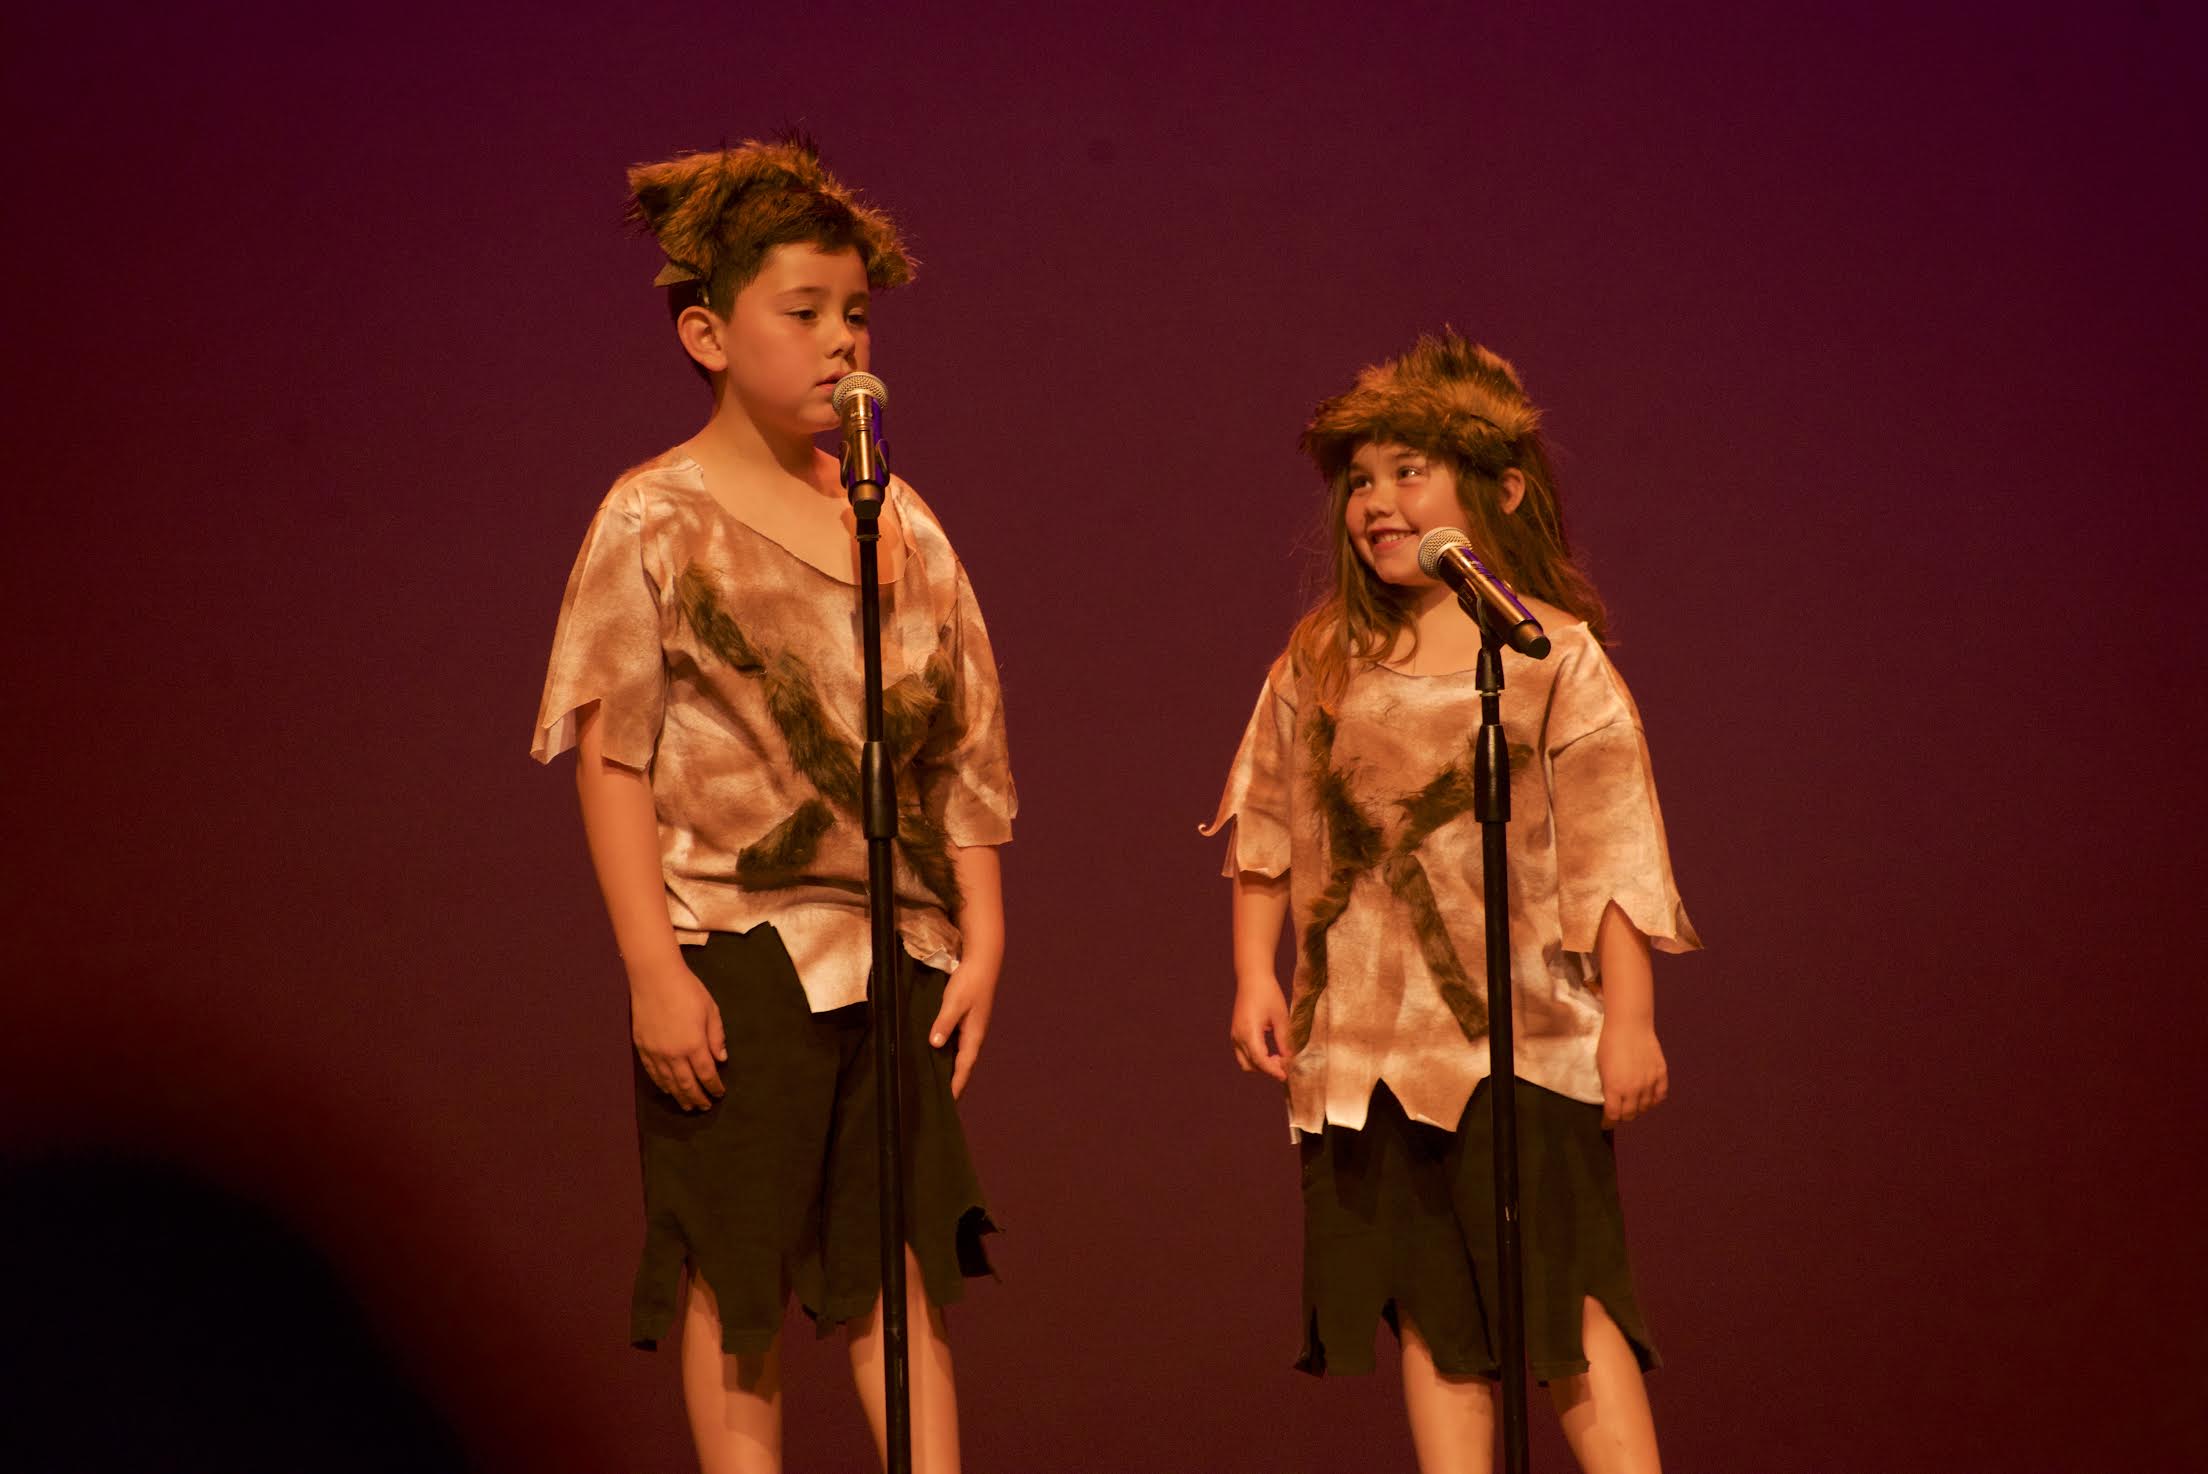 Morse students perform at the school's talent show.